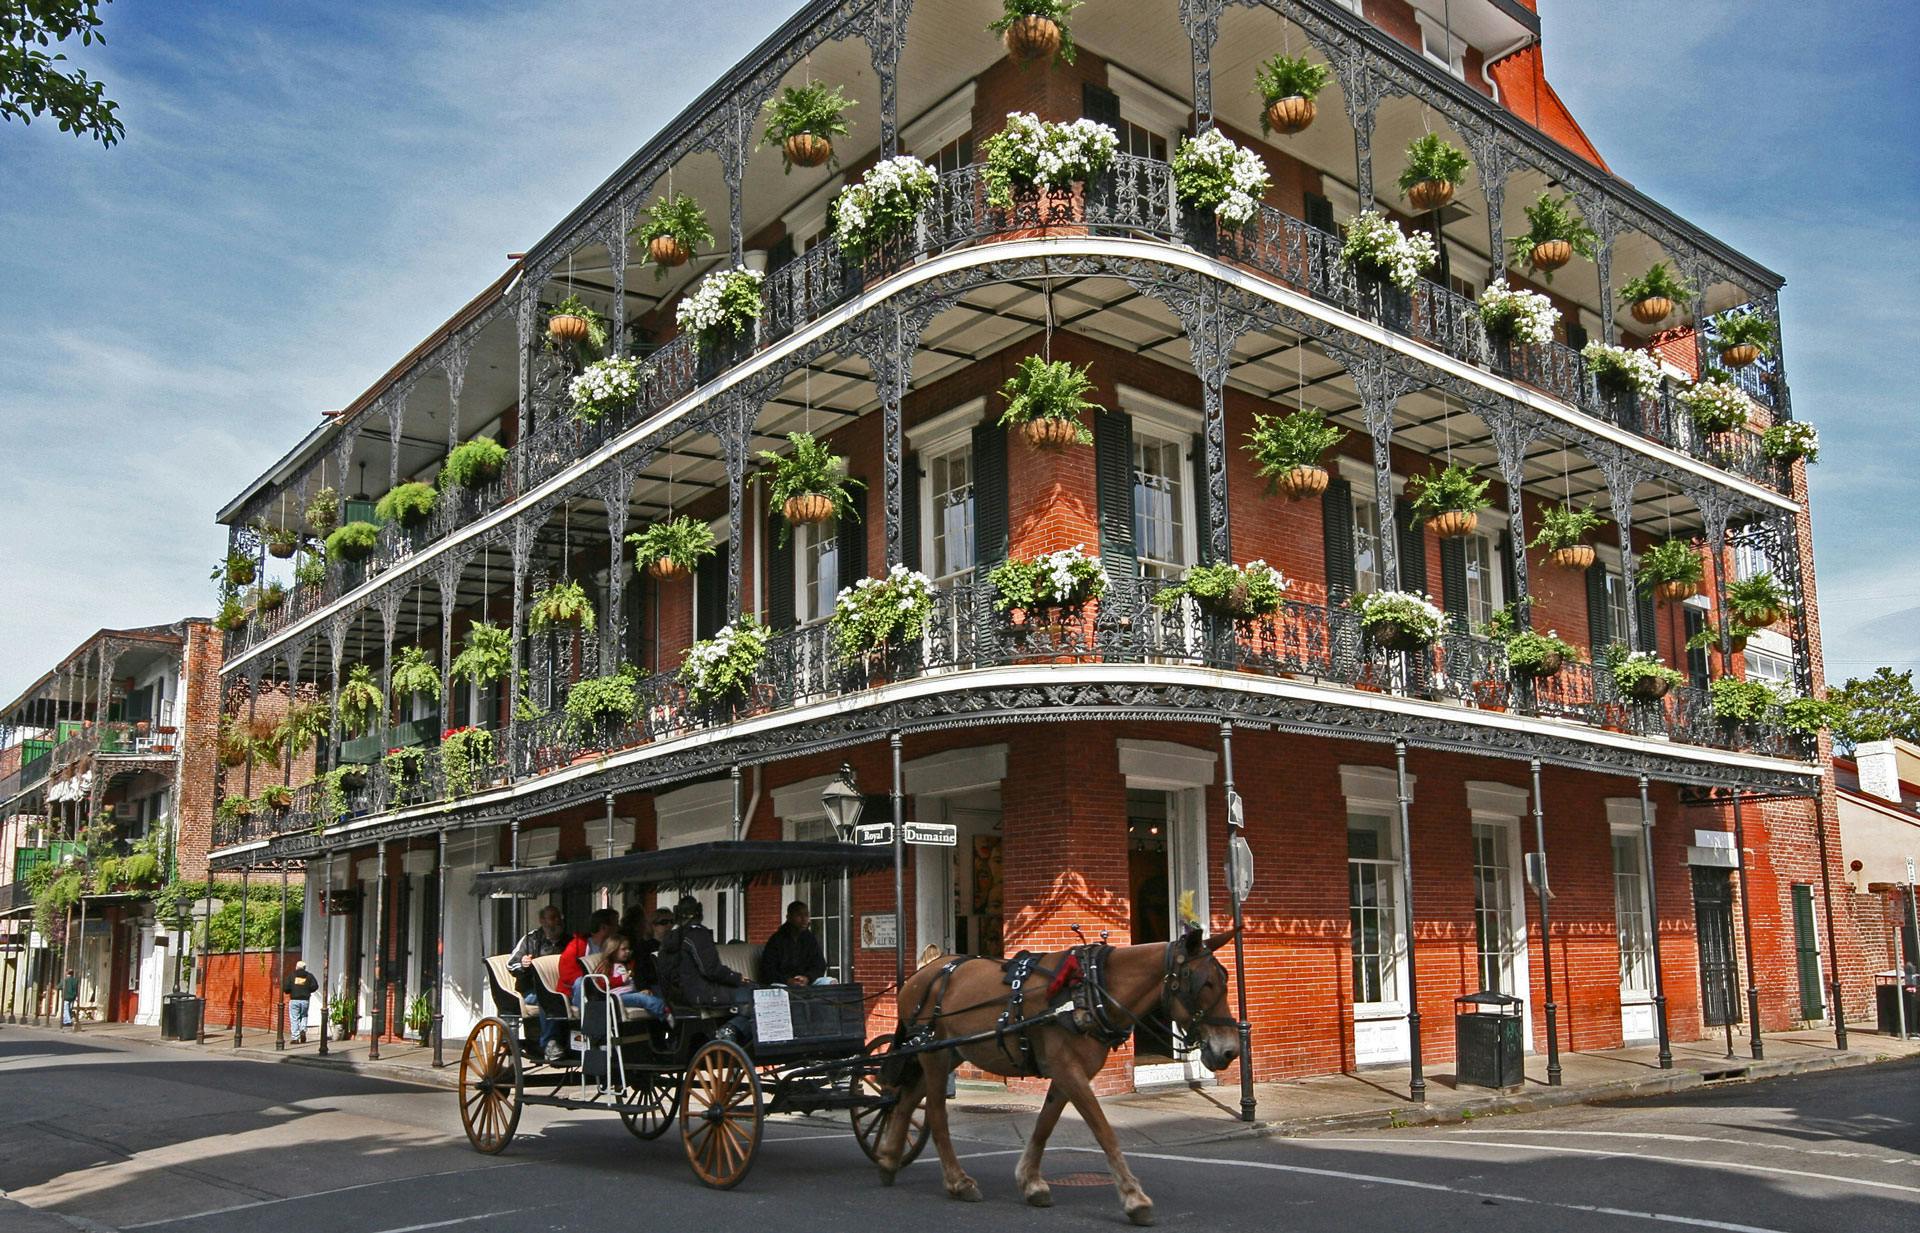 Greek Revival style building in New Orleans with horse and buggy on the road